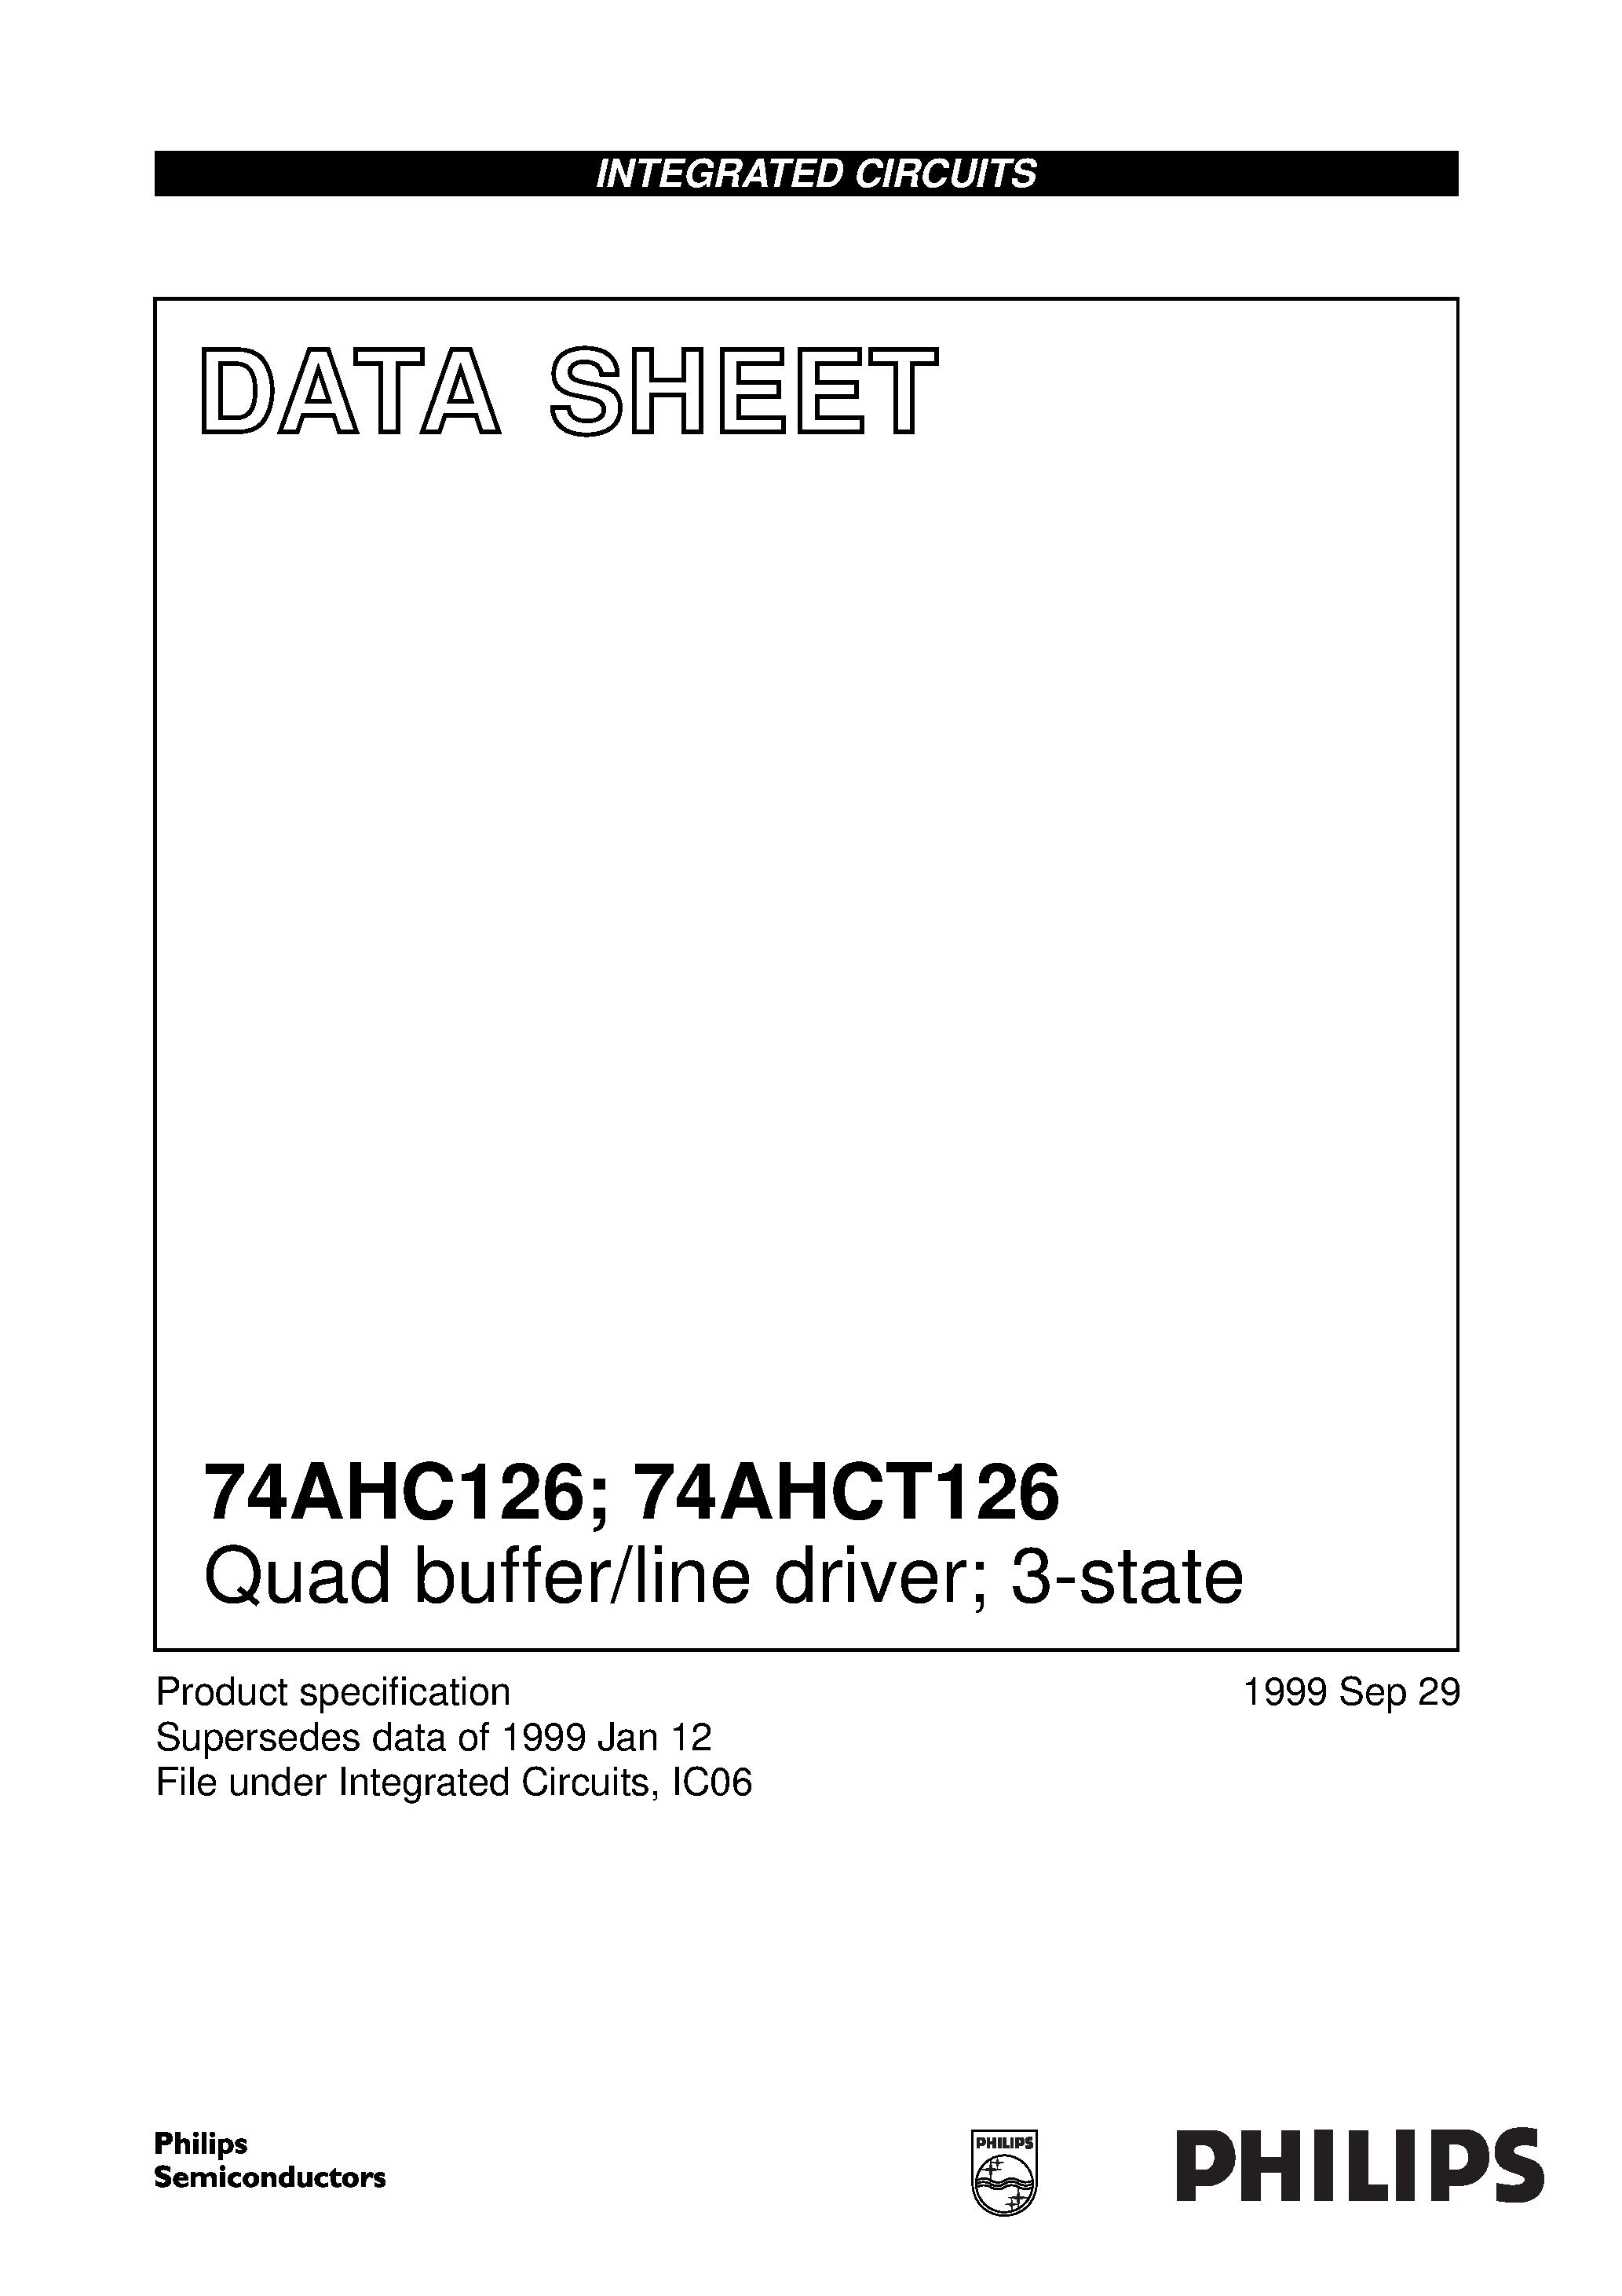 Datasheet 74AHC126D - Quad buffer/line driver; 3-state page 1